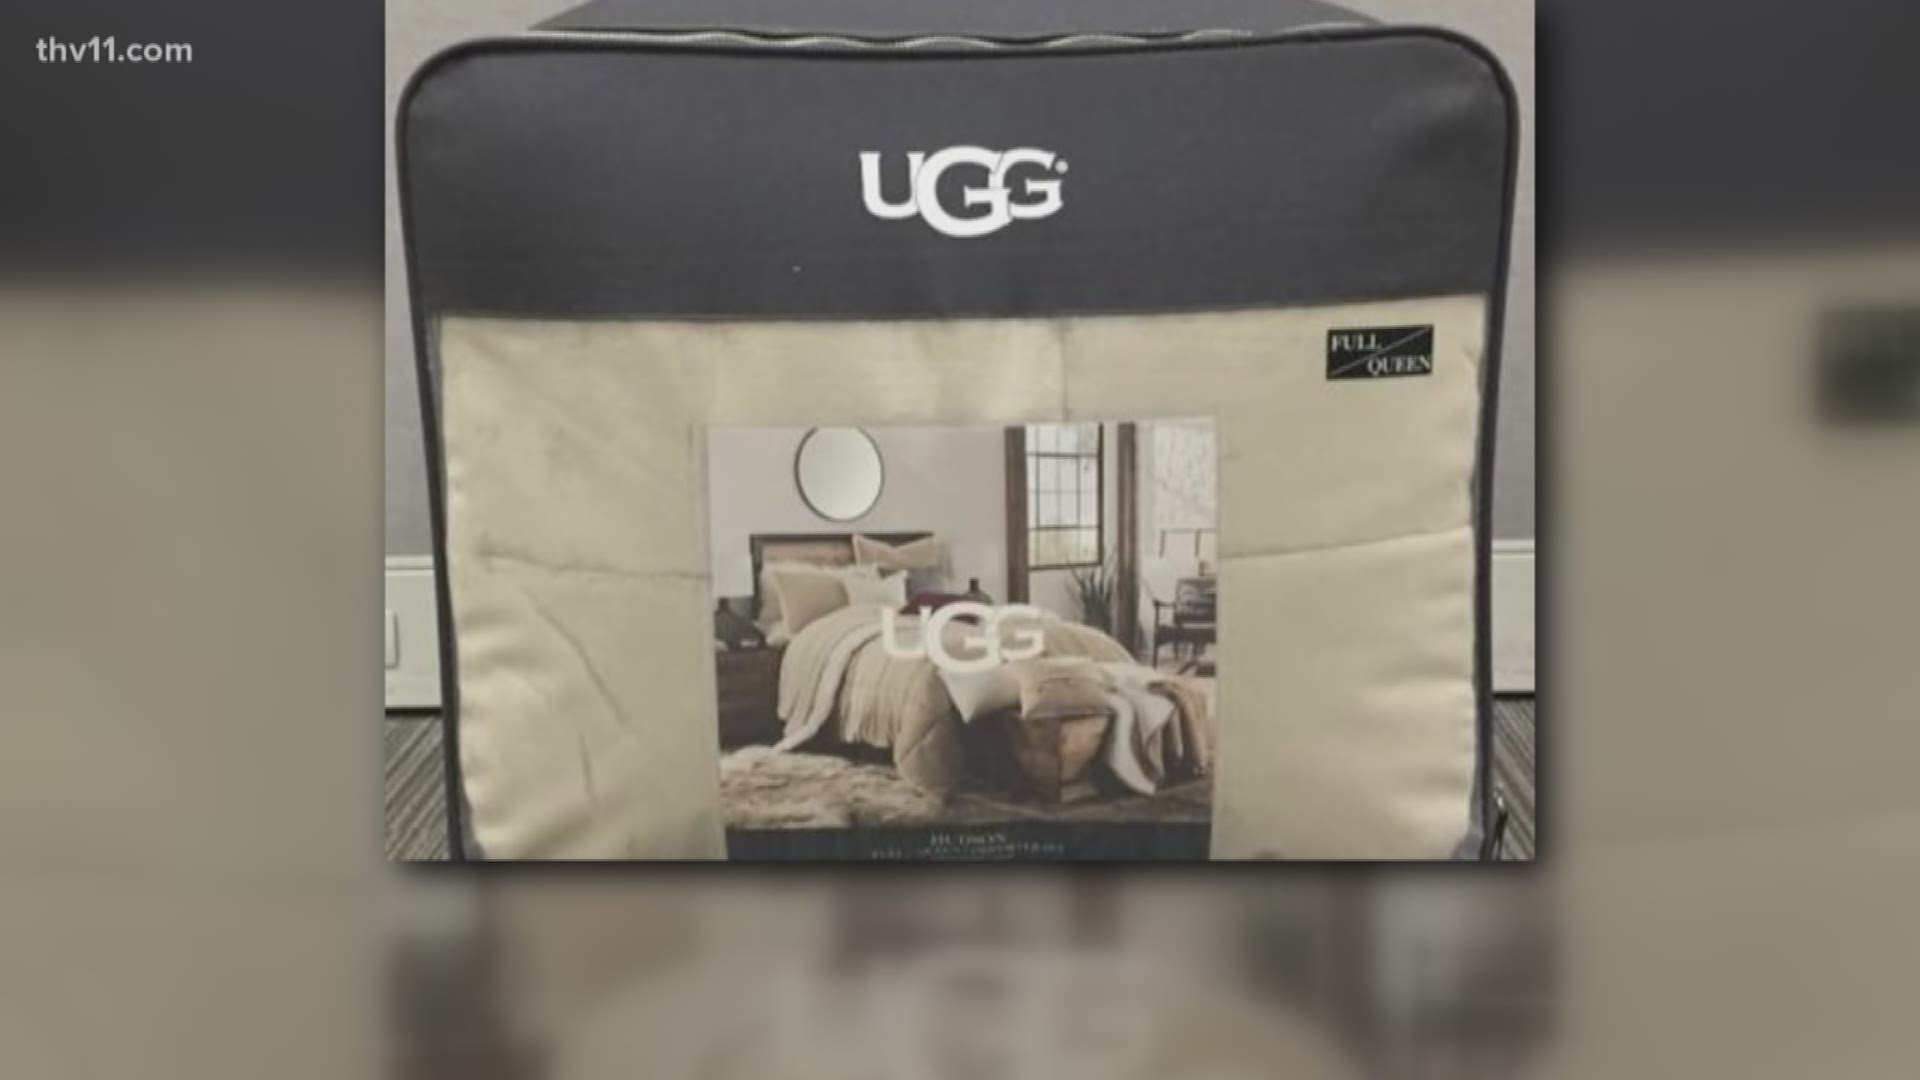 UGG brand comforter recalled because it may expose people to mold. 175K Hudson Comforters have been sold in the U.S.